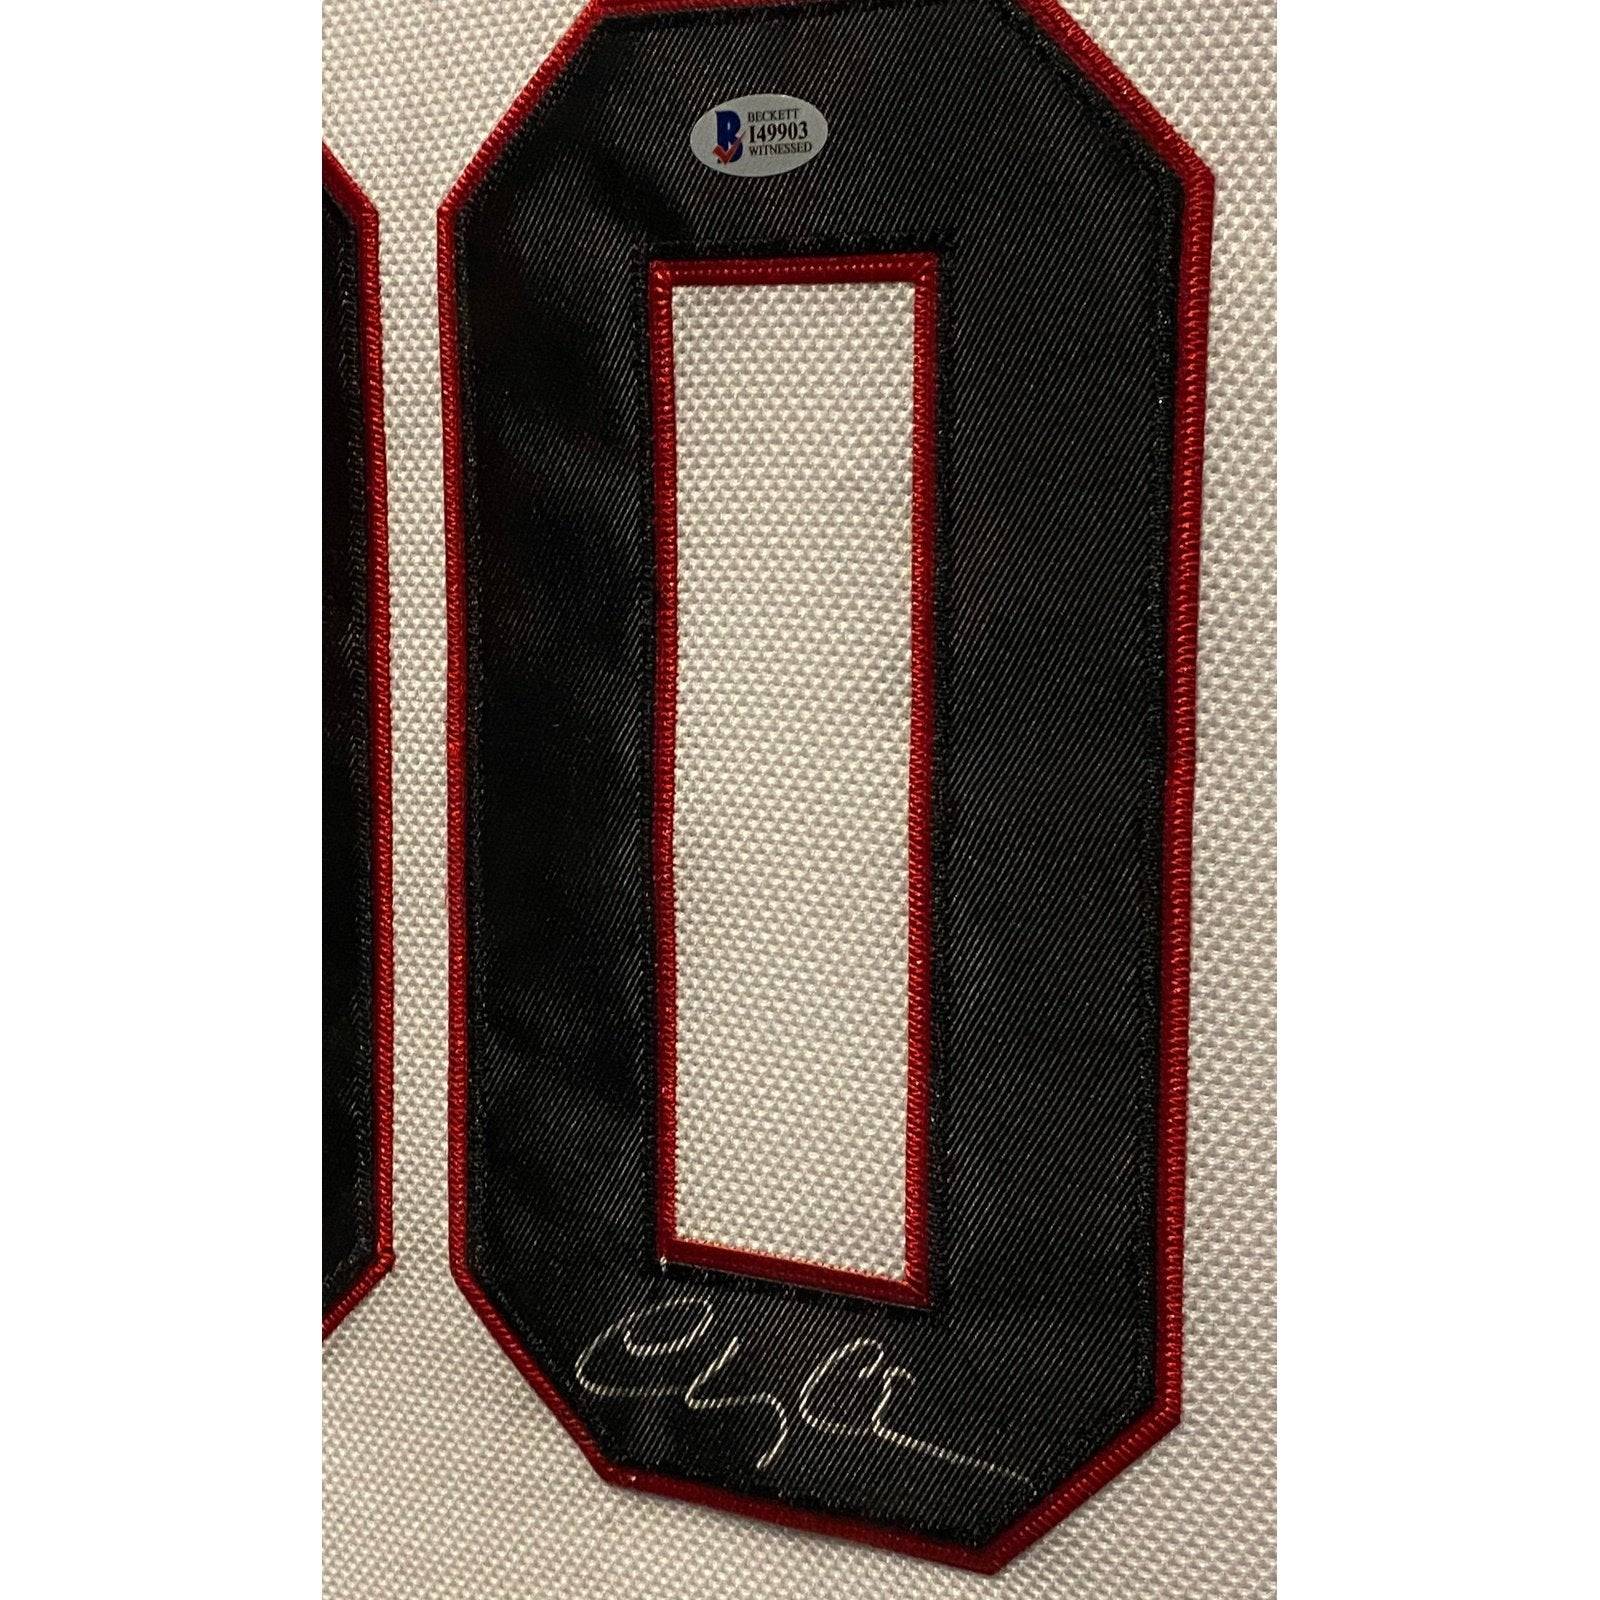 Chevy Chase Signed Blackhawks Griswold Jersey (Beckett COA